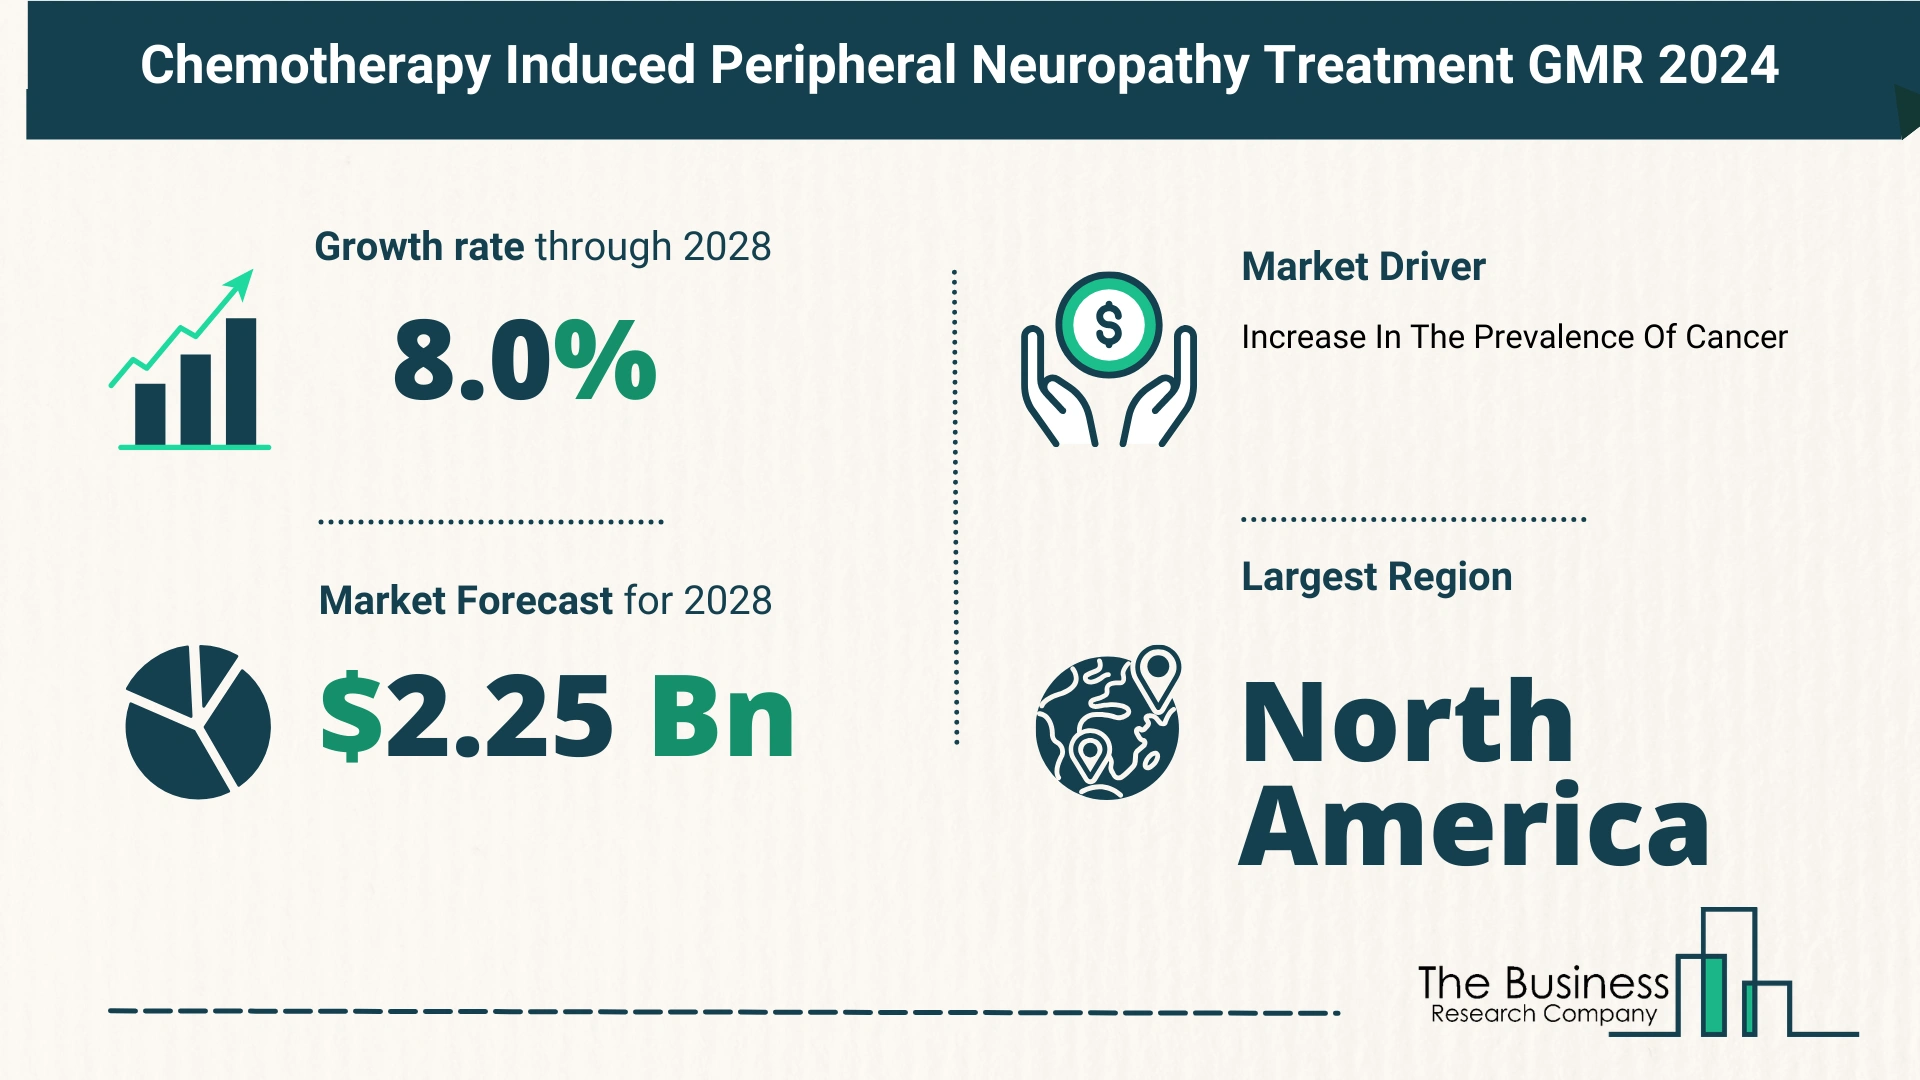 Global Chemotherapy Induced Peripheral Neuropathy Treatment Market Size